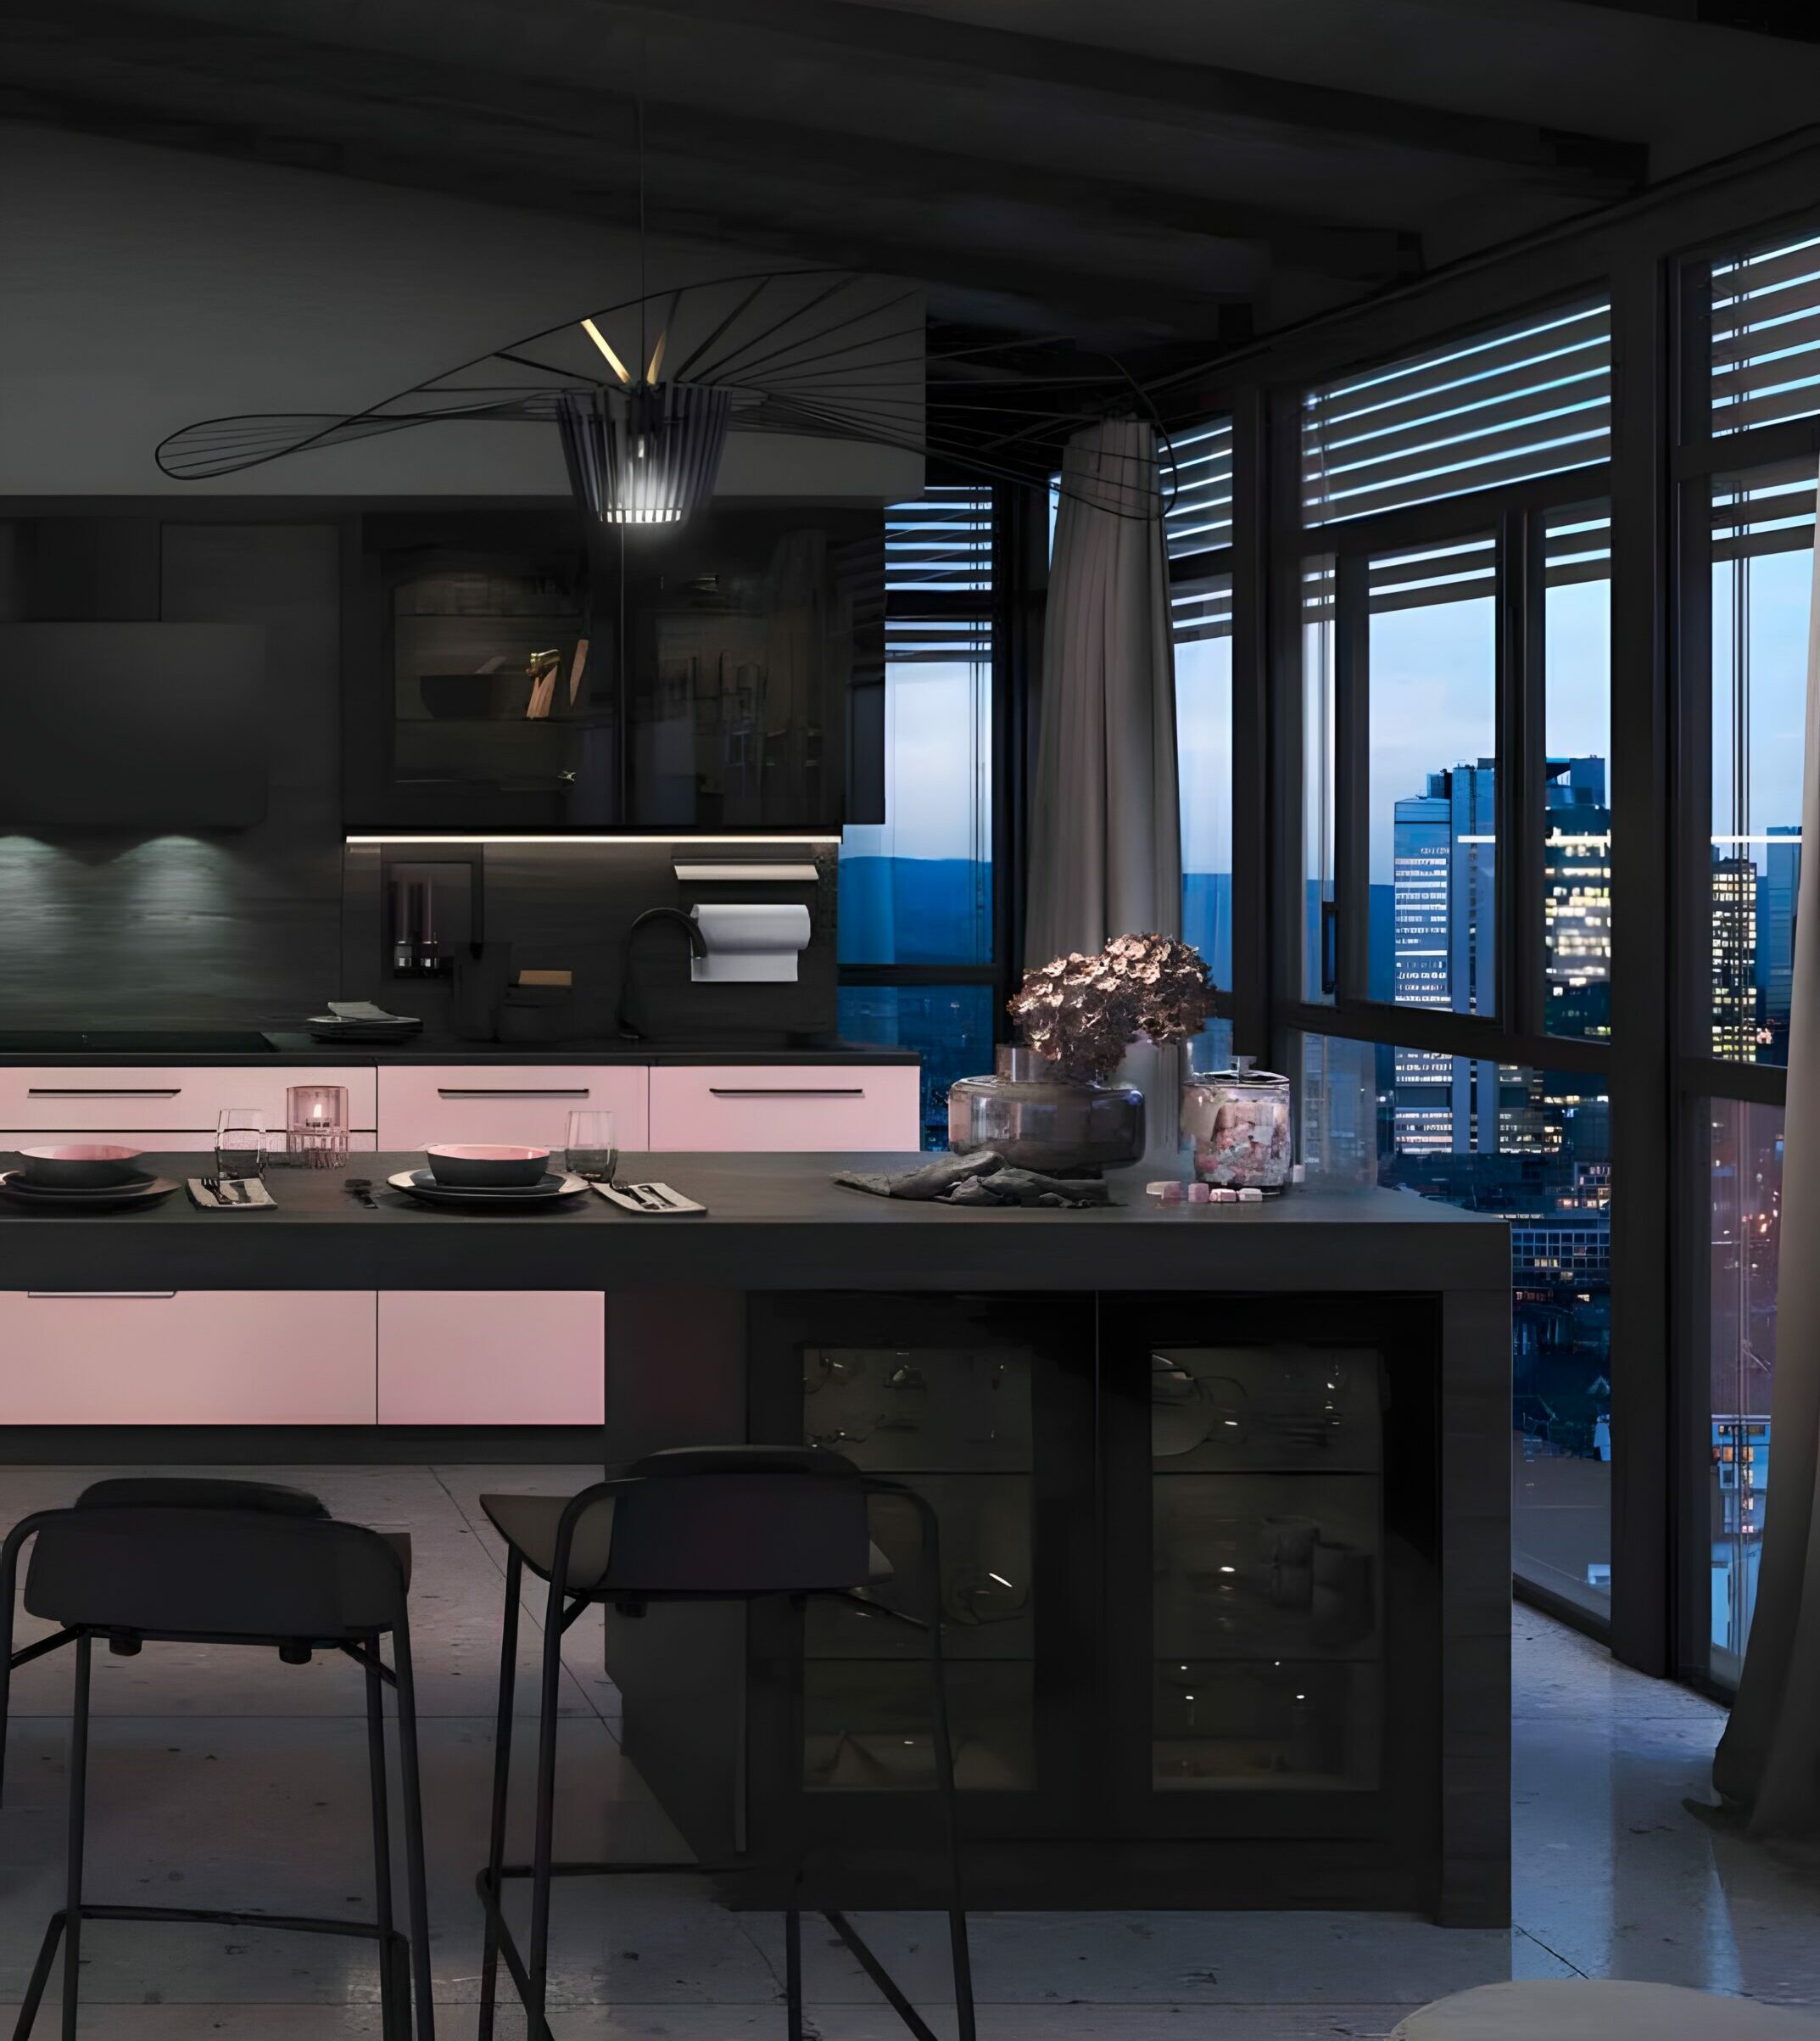 A modern kitchen with melamine cabinets and a city view, featuring an island with bar stools, pendant lighting, an oven, countertops adorned with cookware, and large windows with blinds partially open.